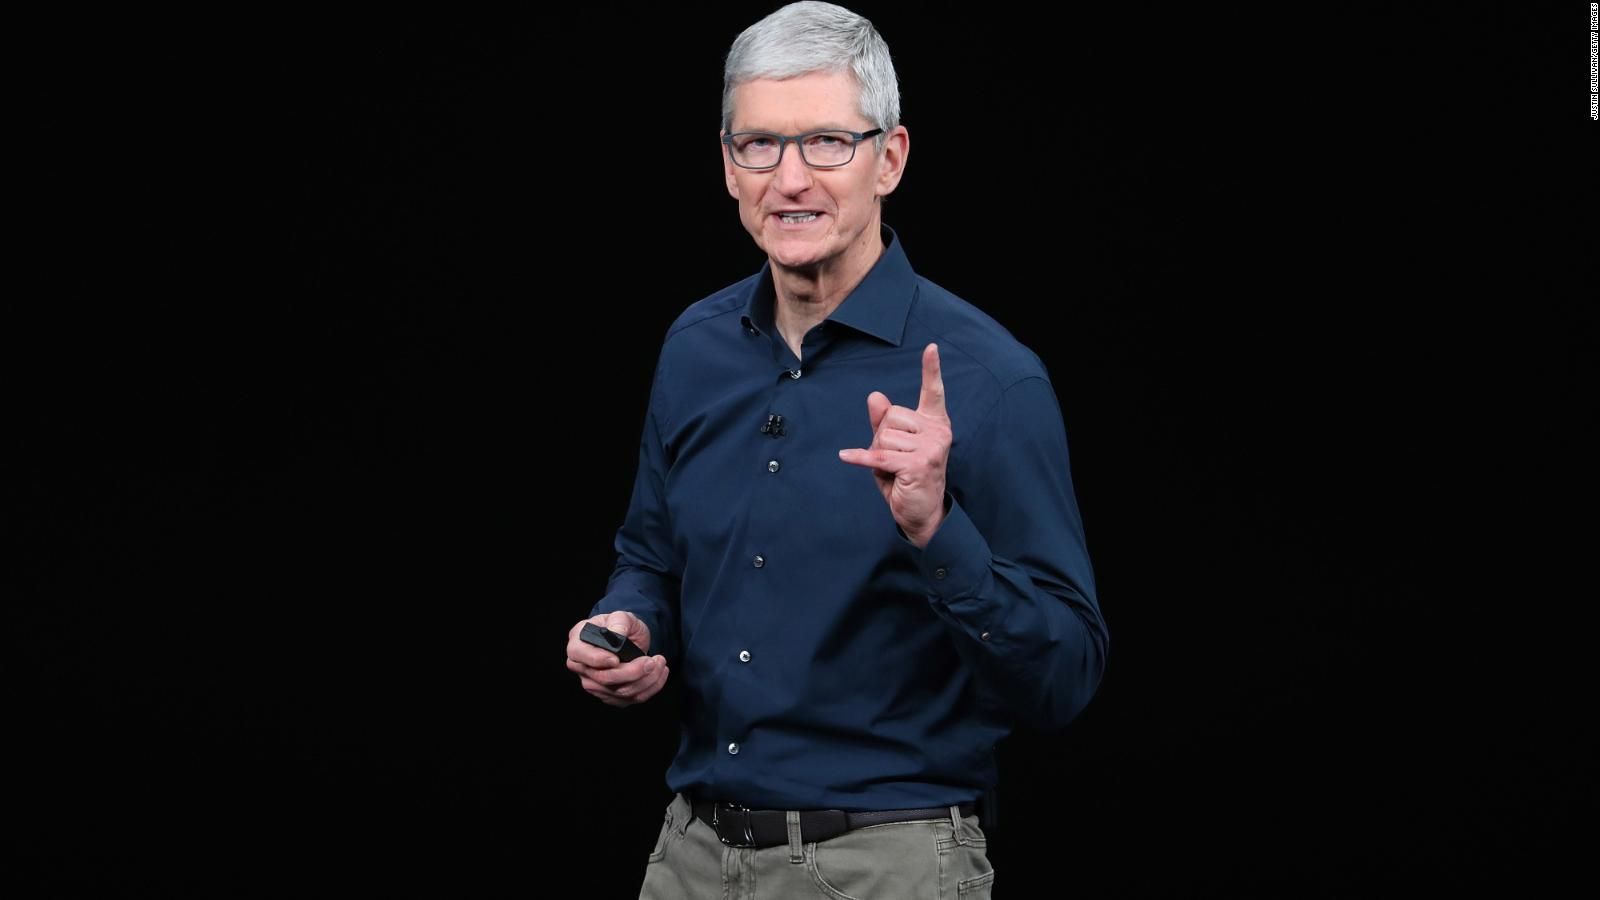 Tim Cook: Hate speech has no place on our platforms